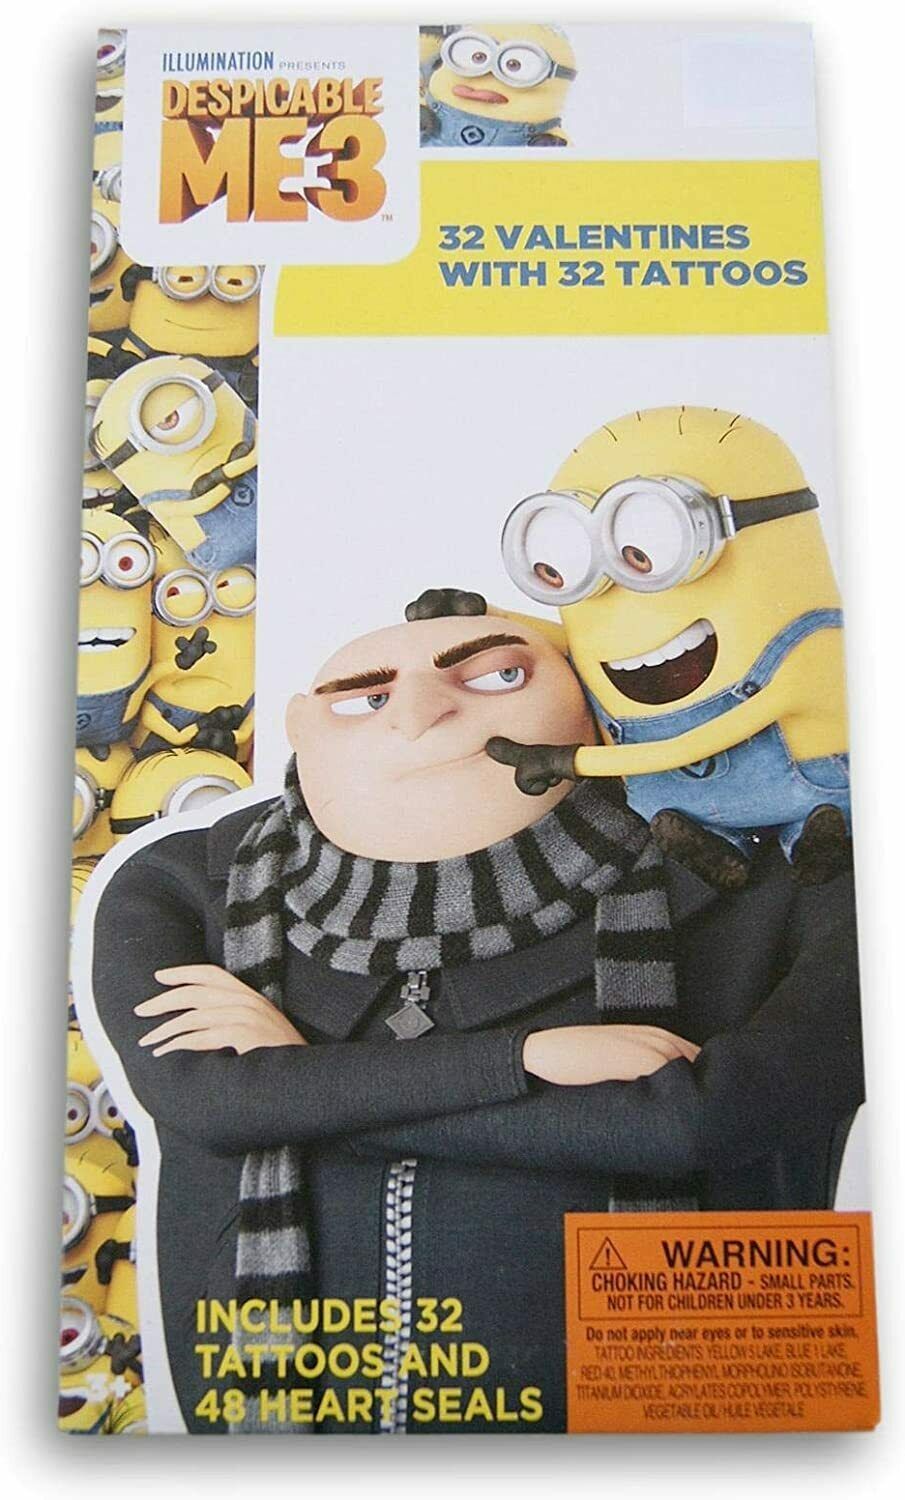 Despicable ME 3 Valentine's Day 32 Cards and Tattoos by Paper Magic Group - $2.99